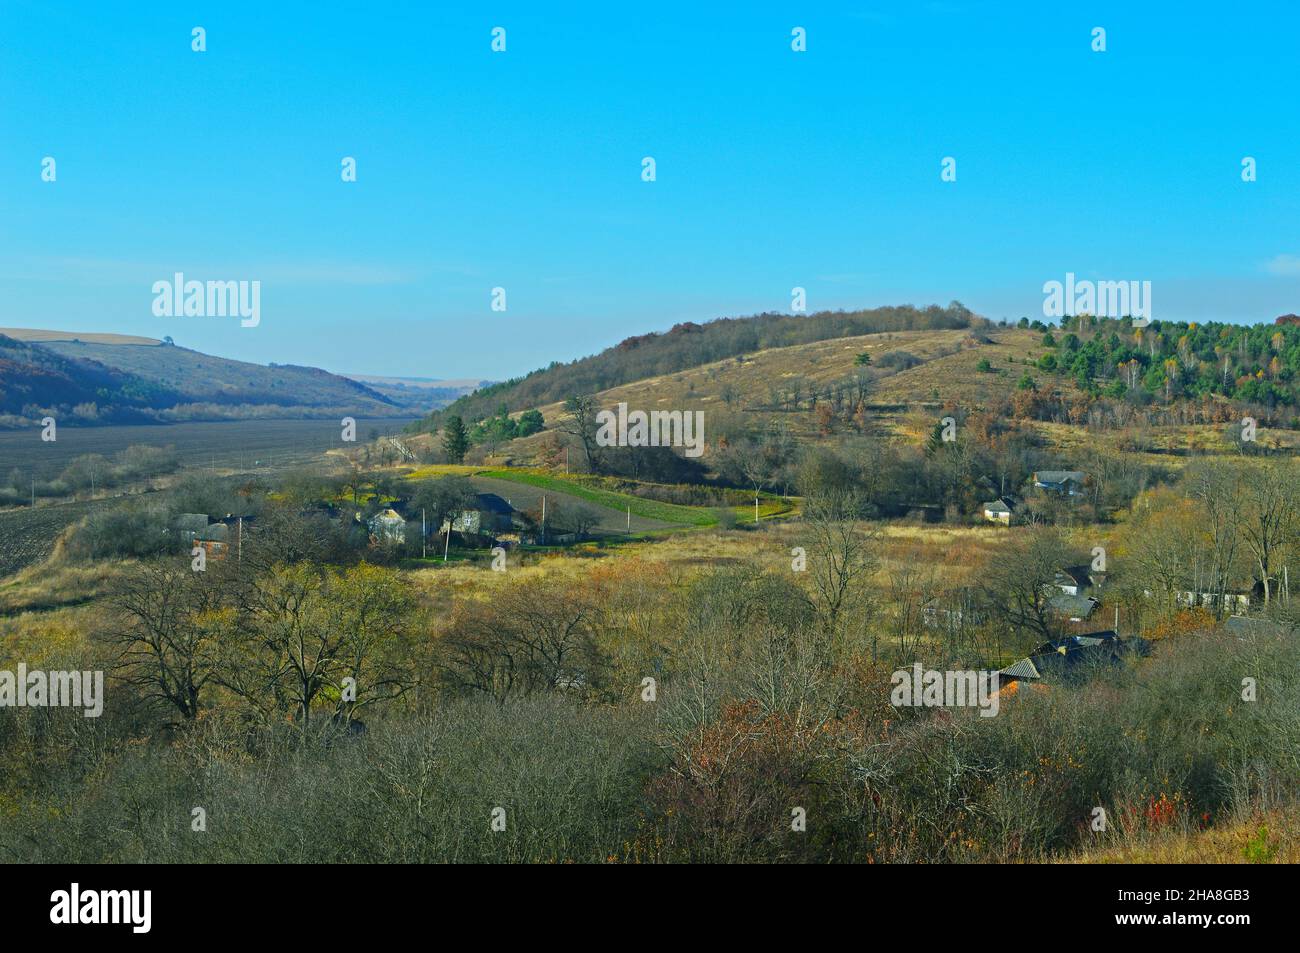 Landscape with a small village on a hilly terrain Stock Photo